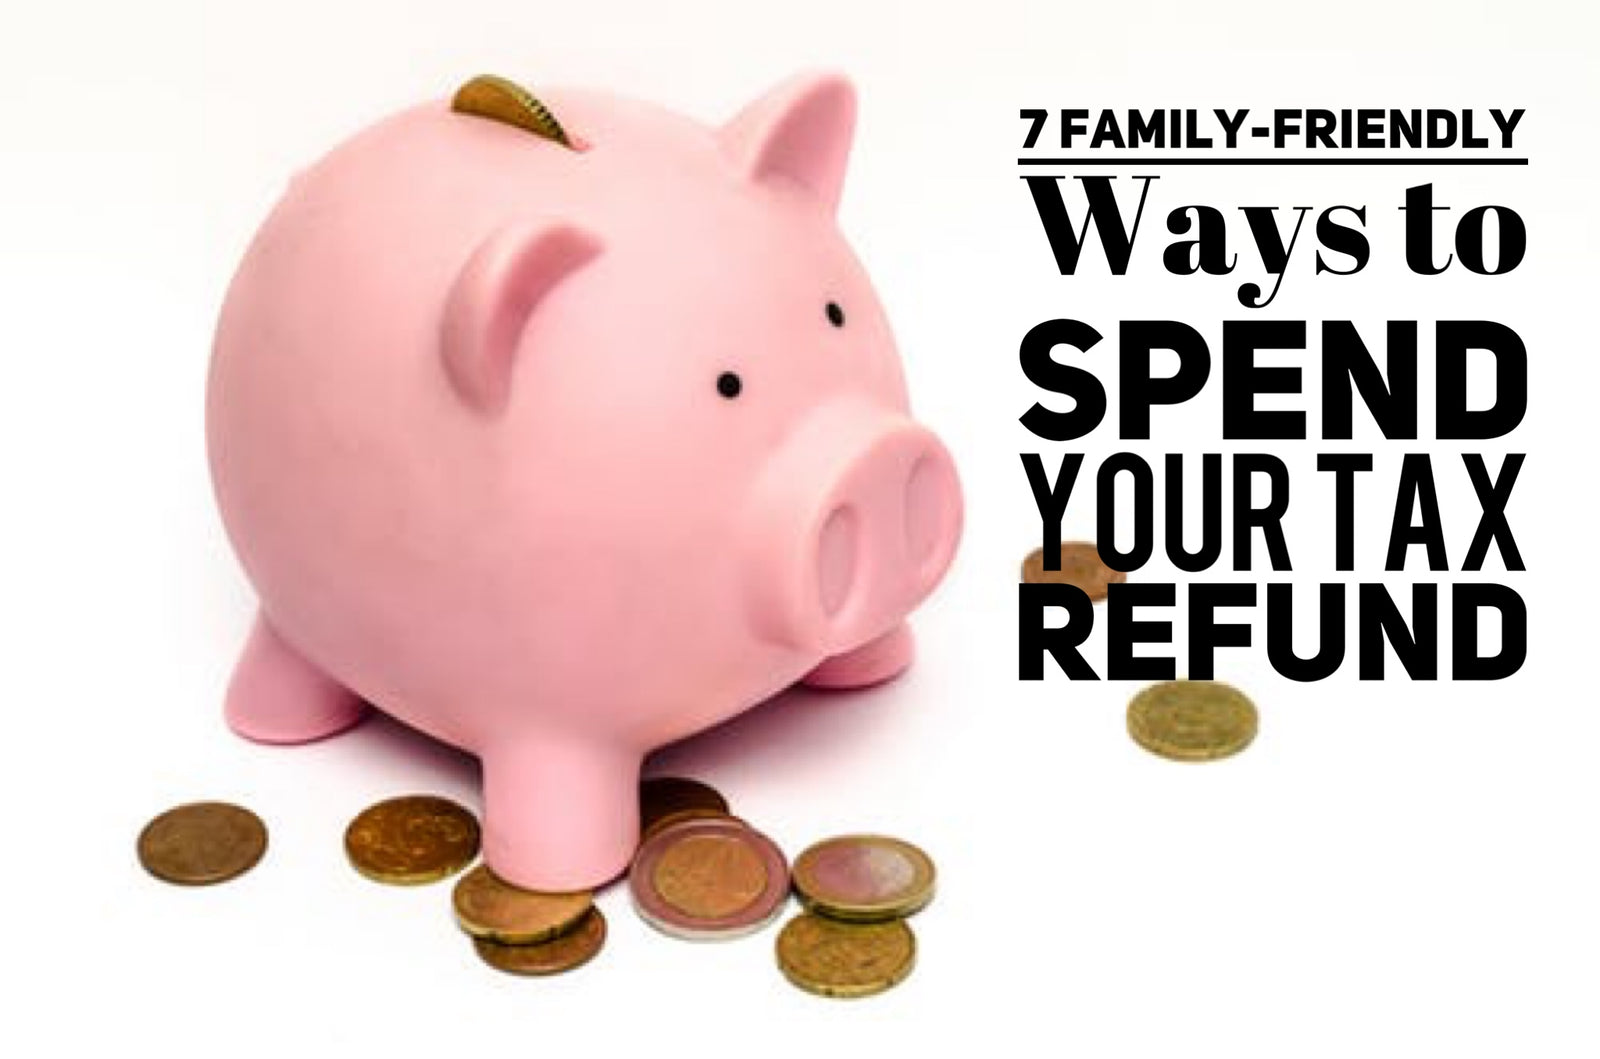 7 Family-Friendly Ways to Spends Your Tax Refund